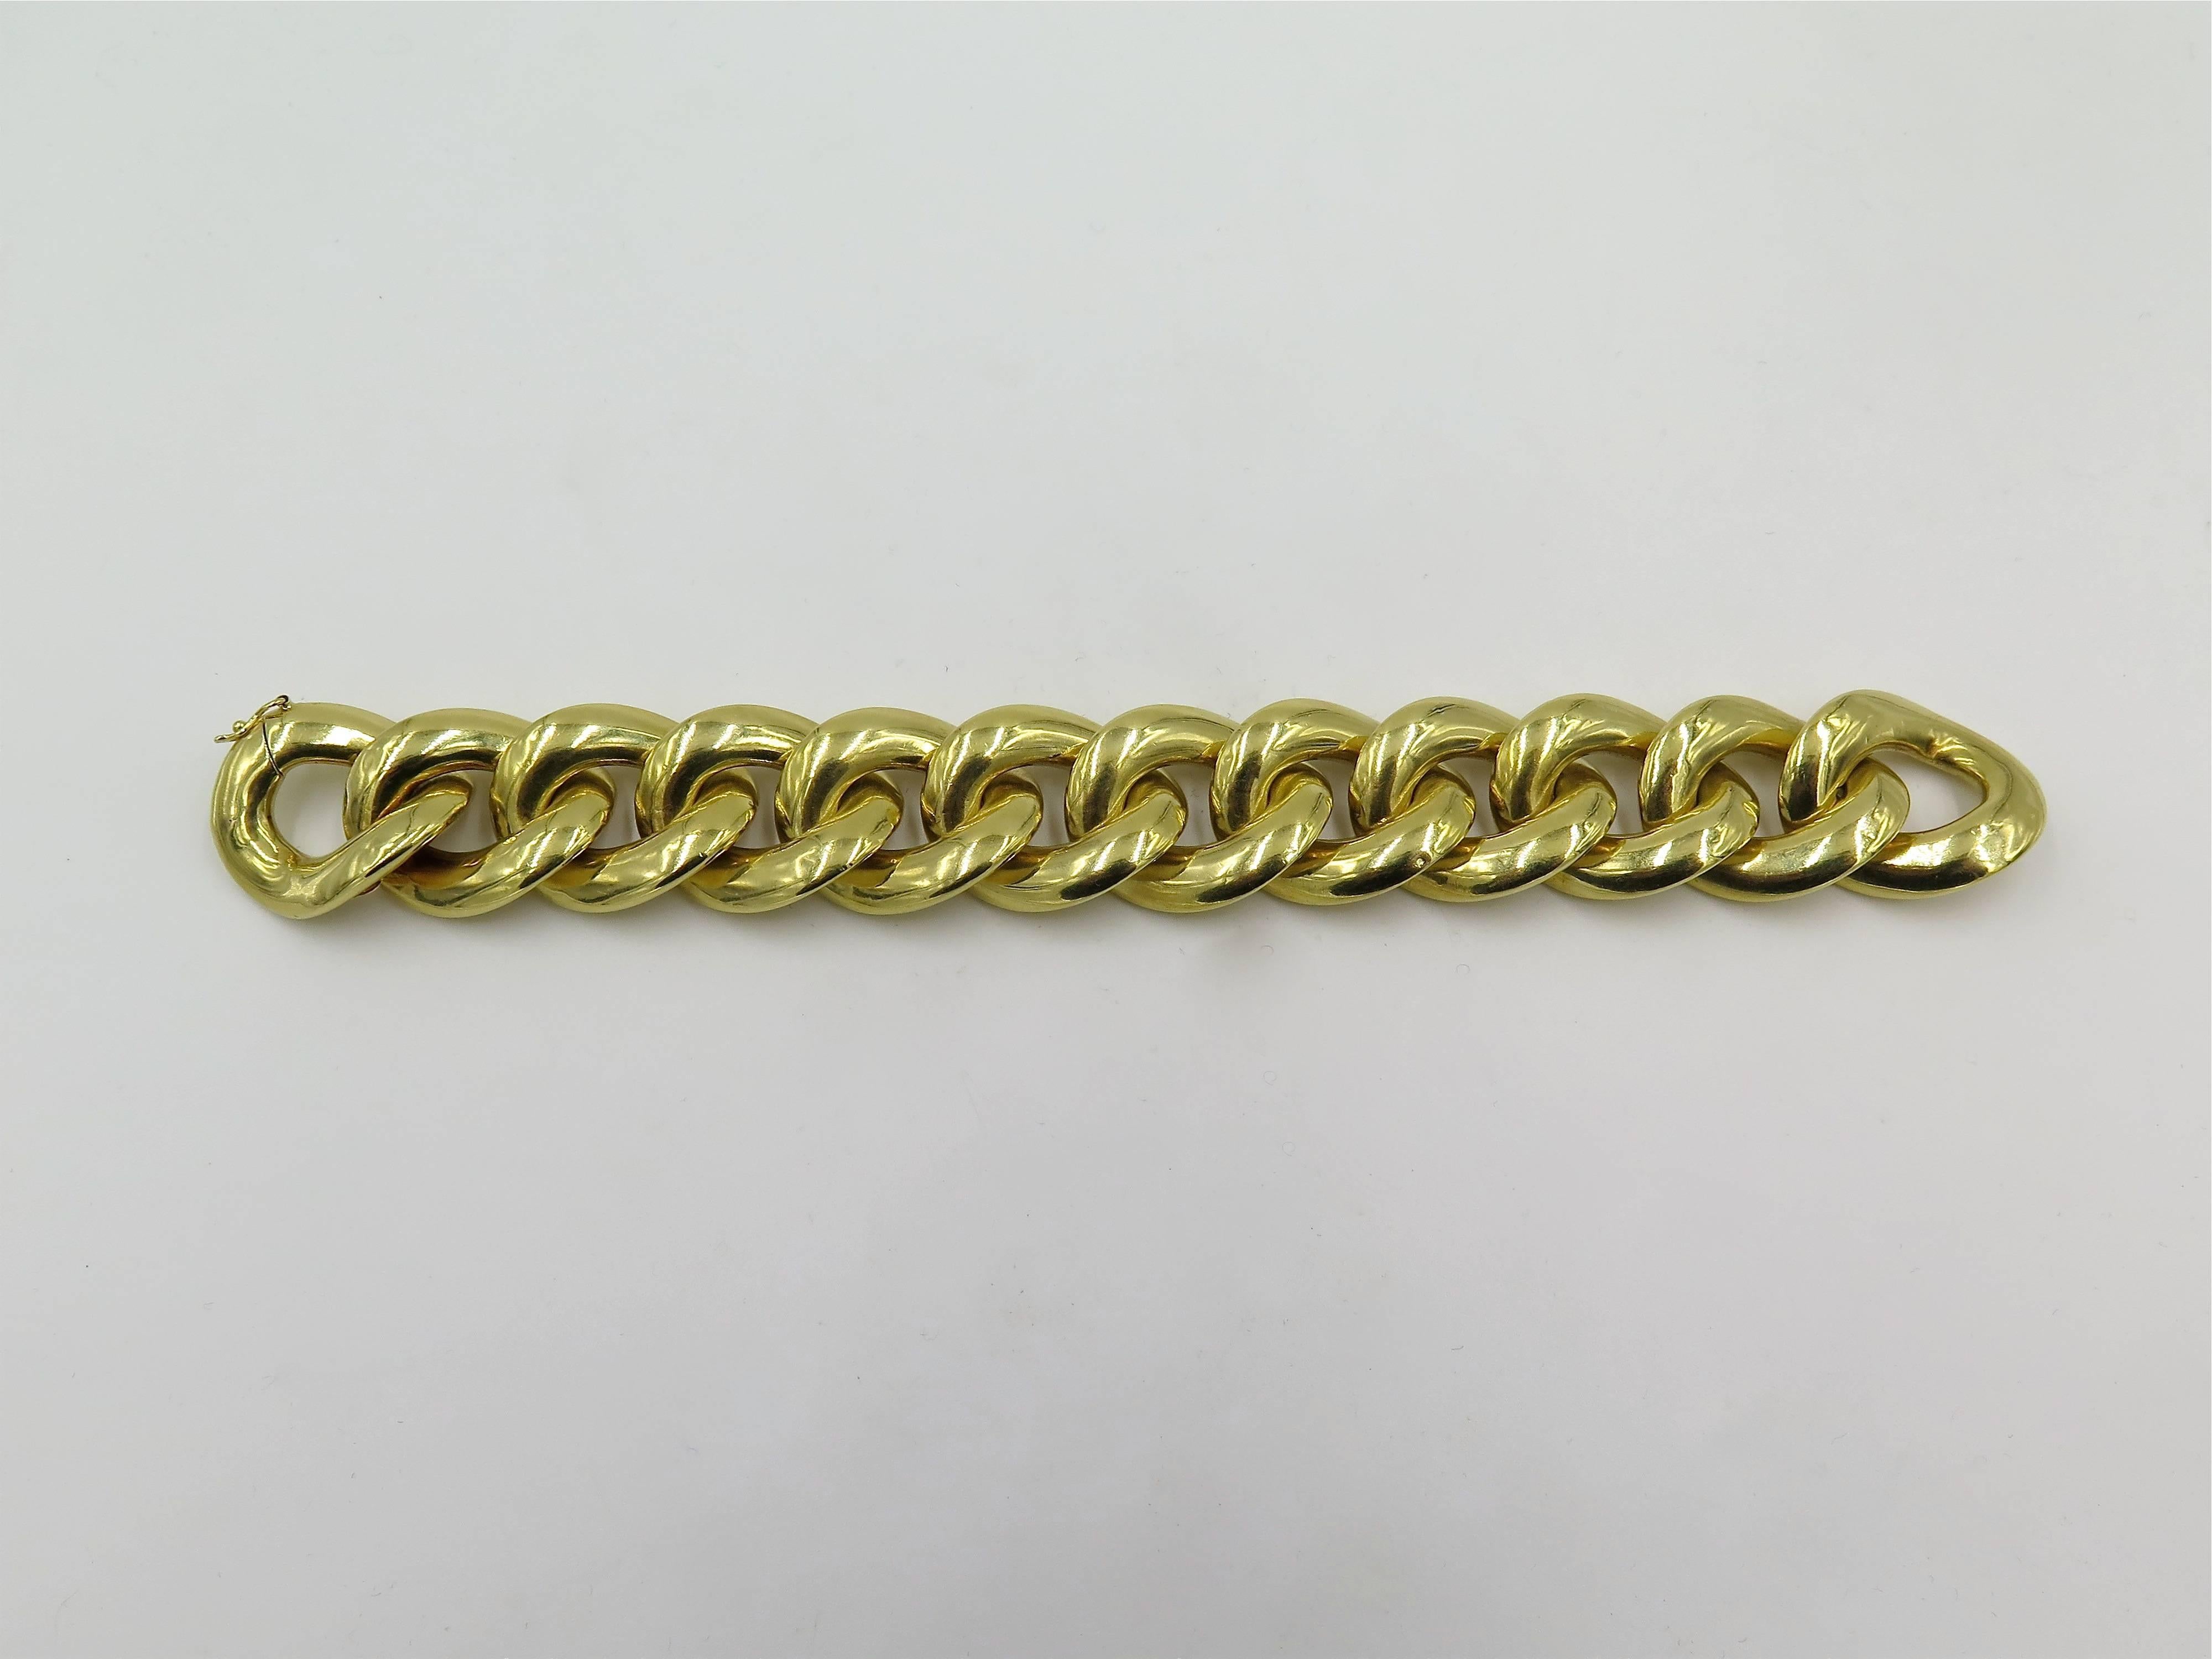 An 18 karat yellow gold bracelet. Bulgari. Of polished curb link design. Width is approximately 1 inch, length is approximately 7 1/2 inches, gross weight is approximately 77.9 grams. 